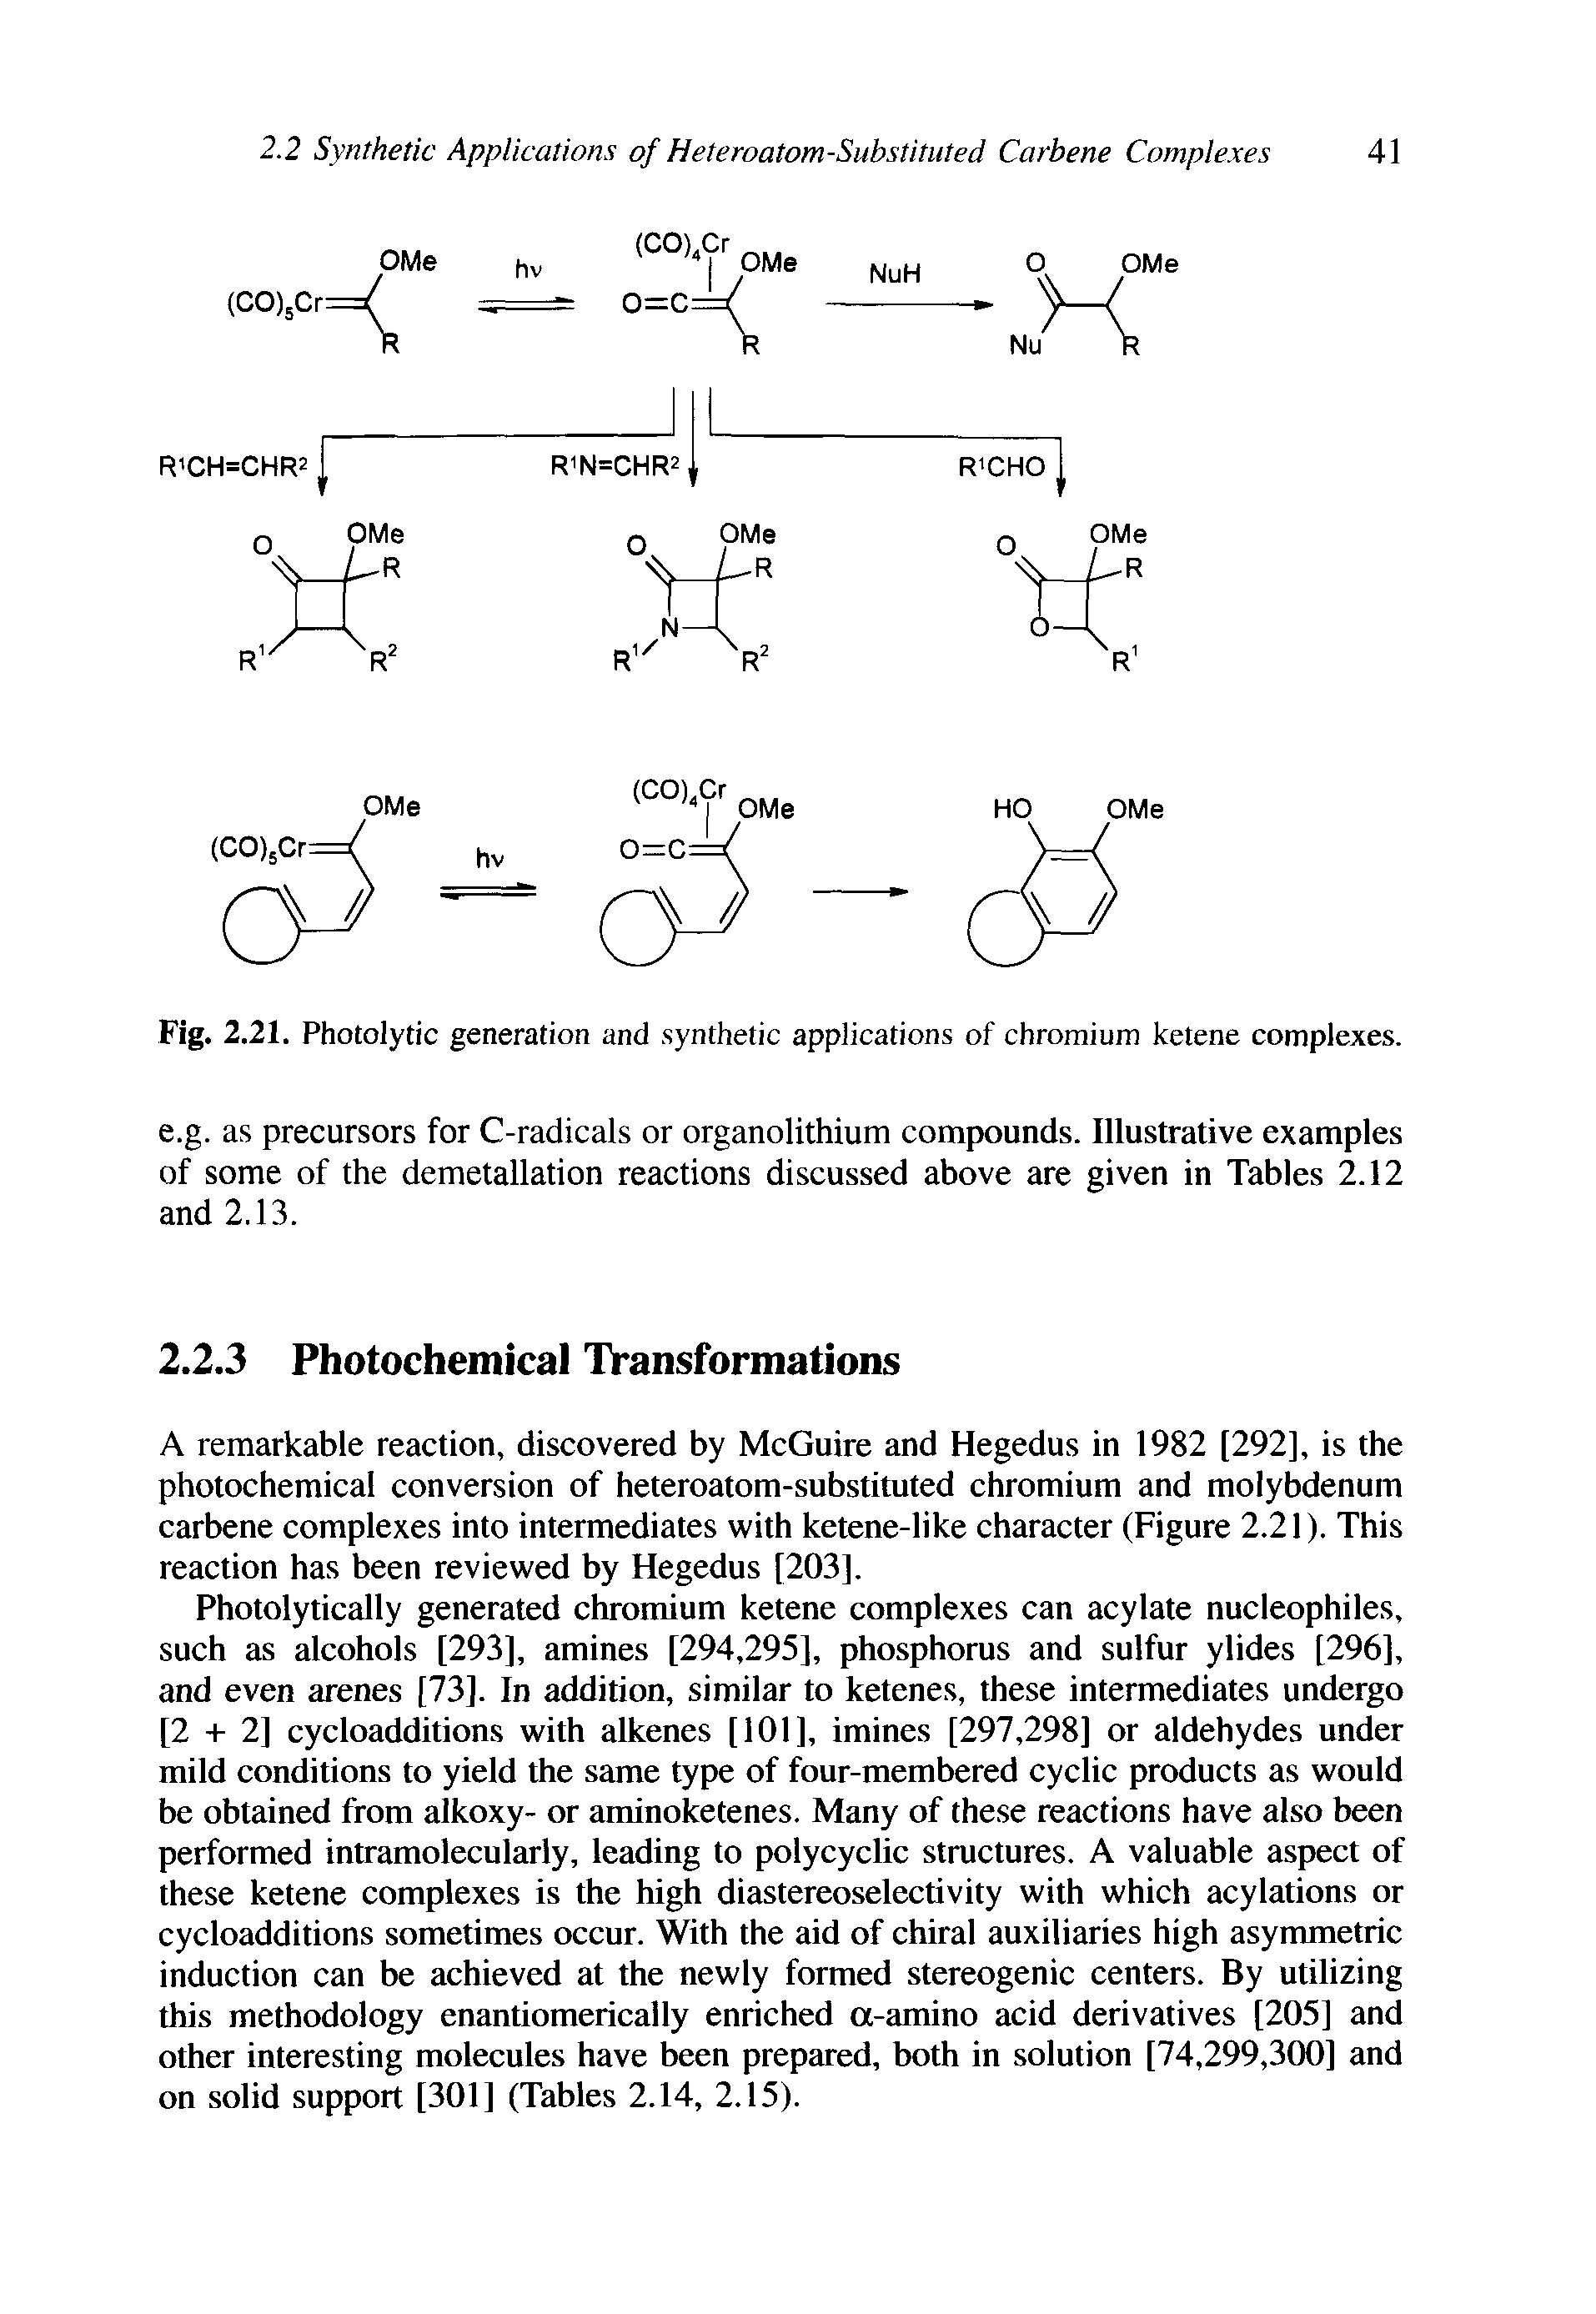 Fig. 2.21. Photolytic generation and. synthetic applications of chromium ketene complexes.